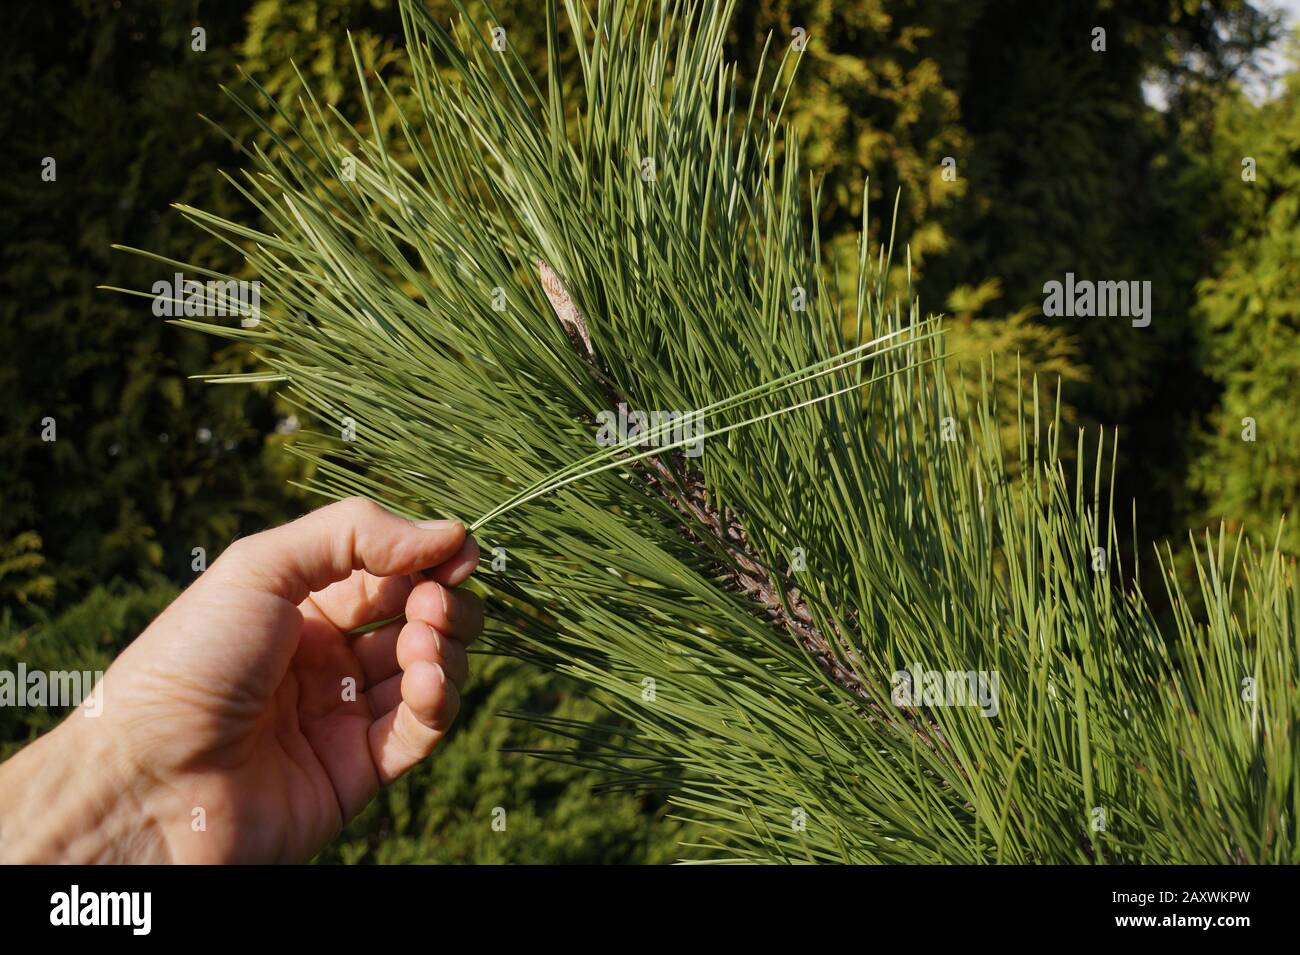 Gardener shows long needles of black pine. Pinus nigra, the Austrian pine or black pine, is an ideal type of tree for planting in cities in a polluted Stock Photo